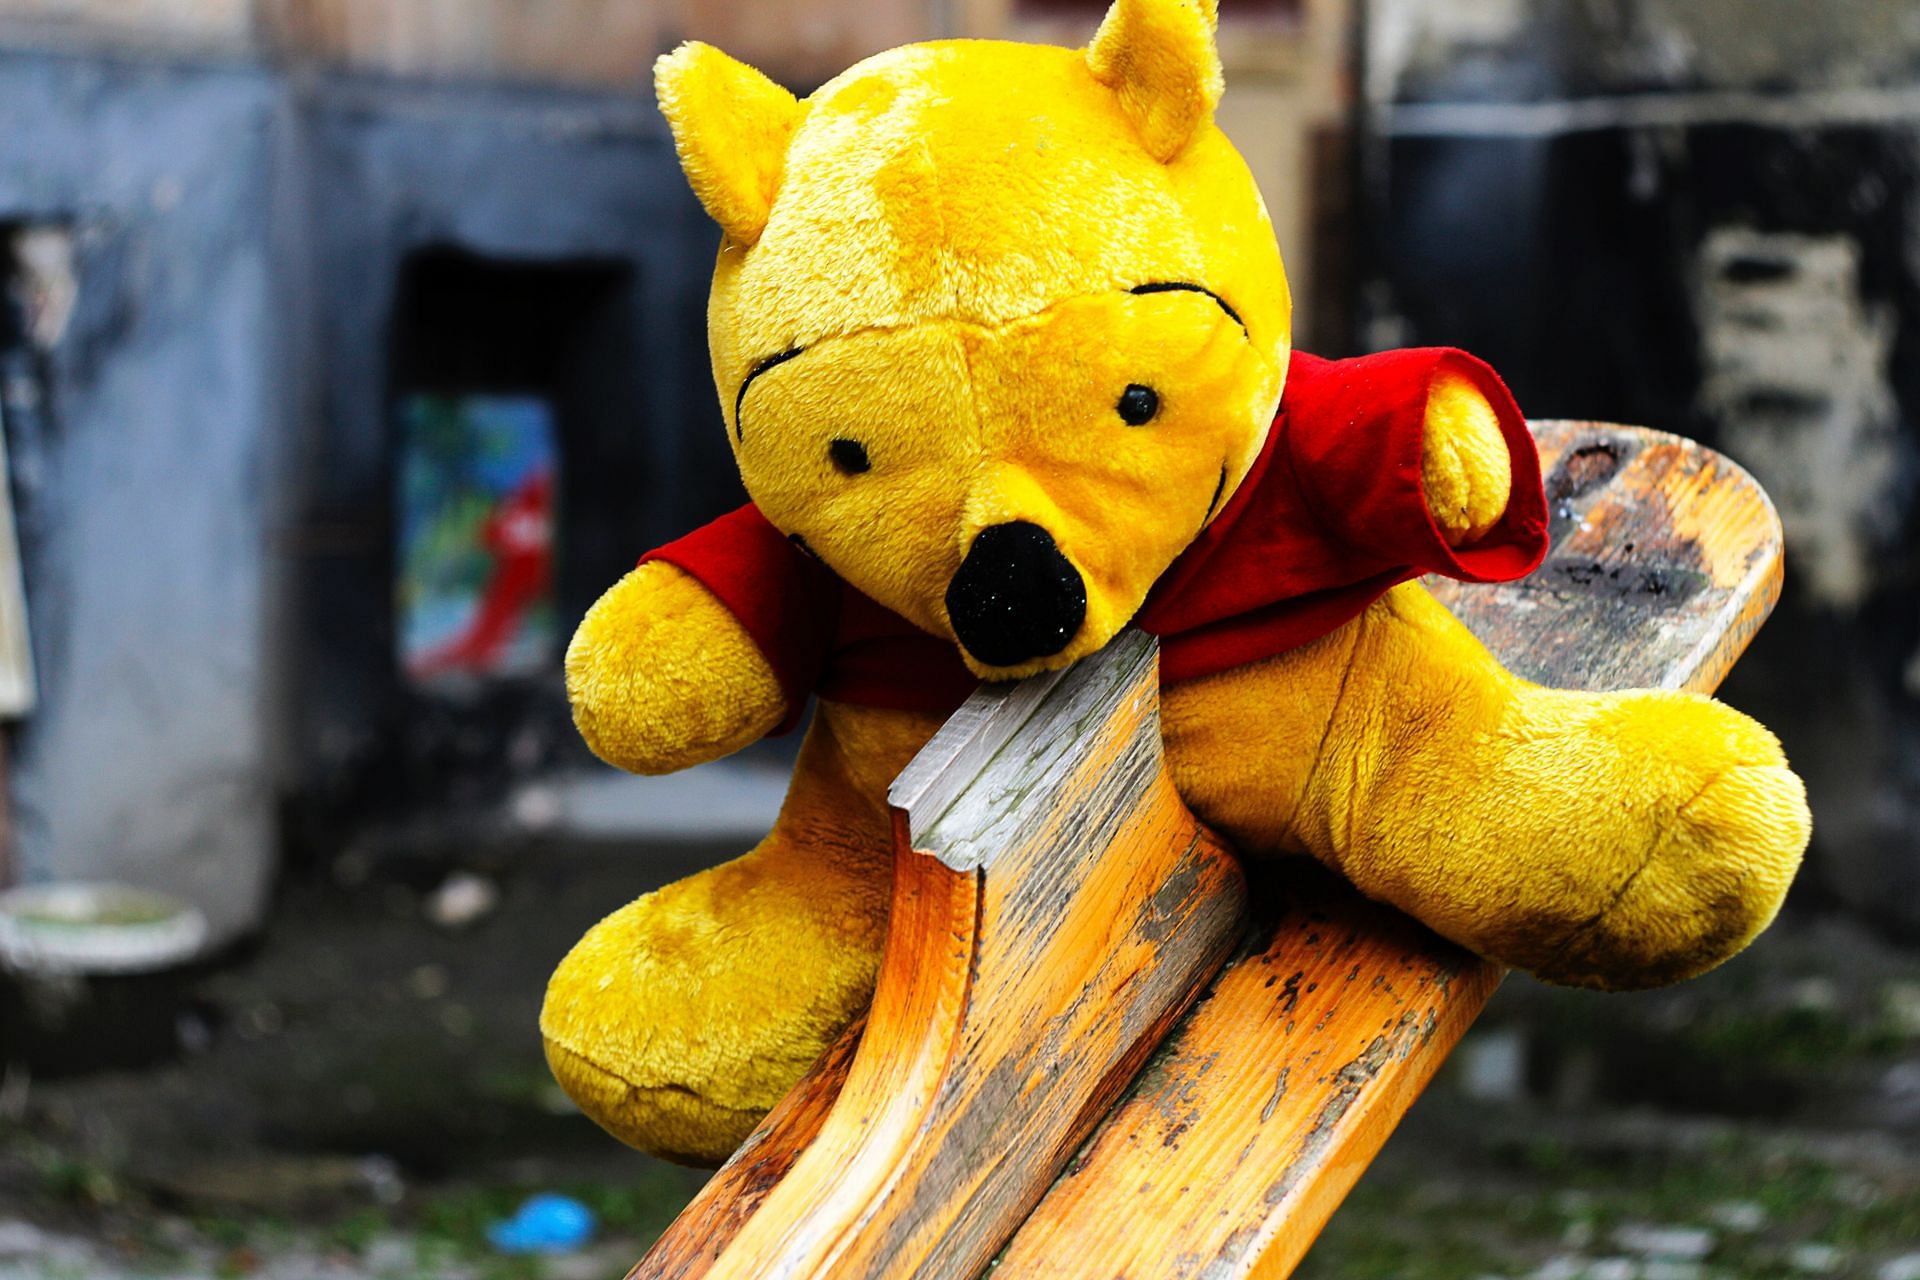 While Pooh is a well-known character, the winnie the pooh mental illness is not a common theory. (Image via Pexels/ Inna)